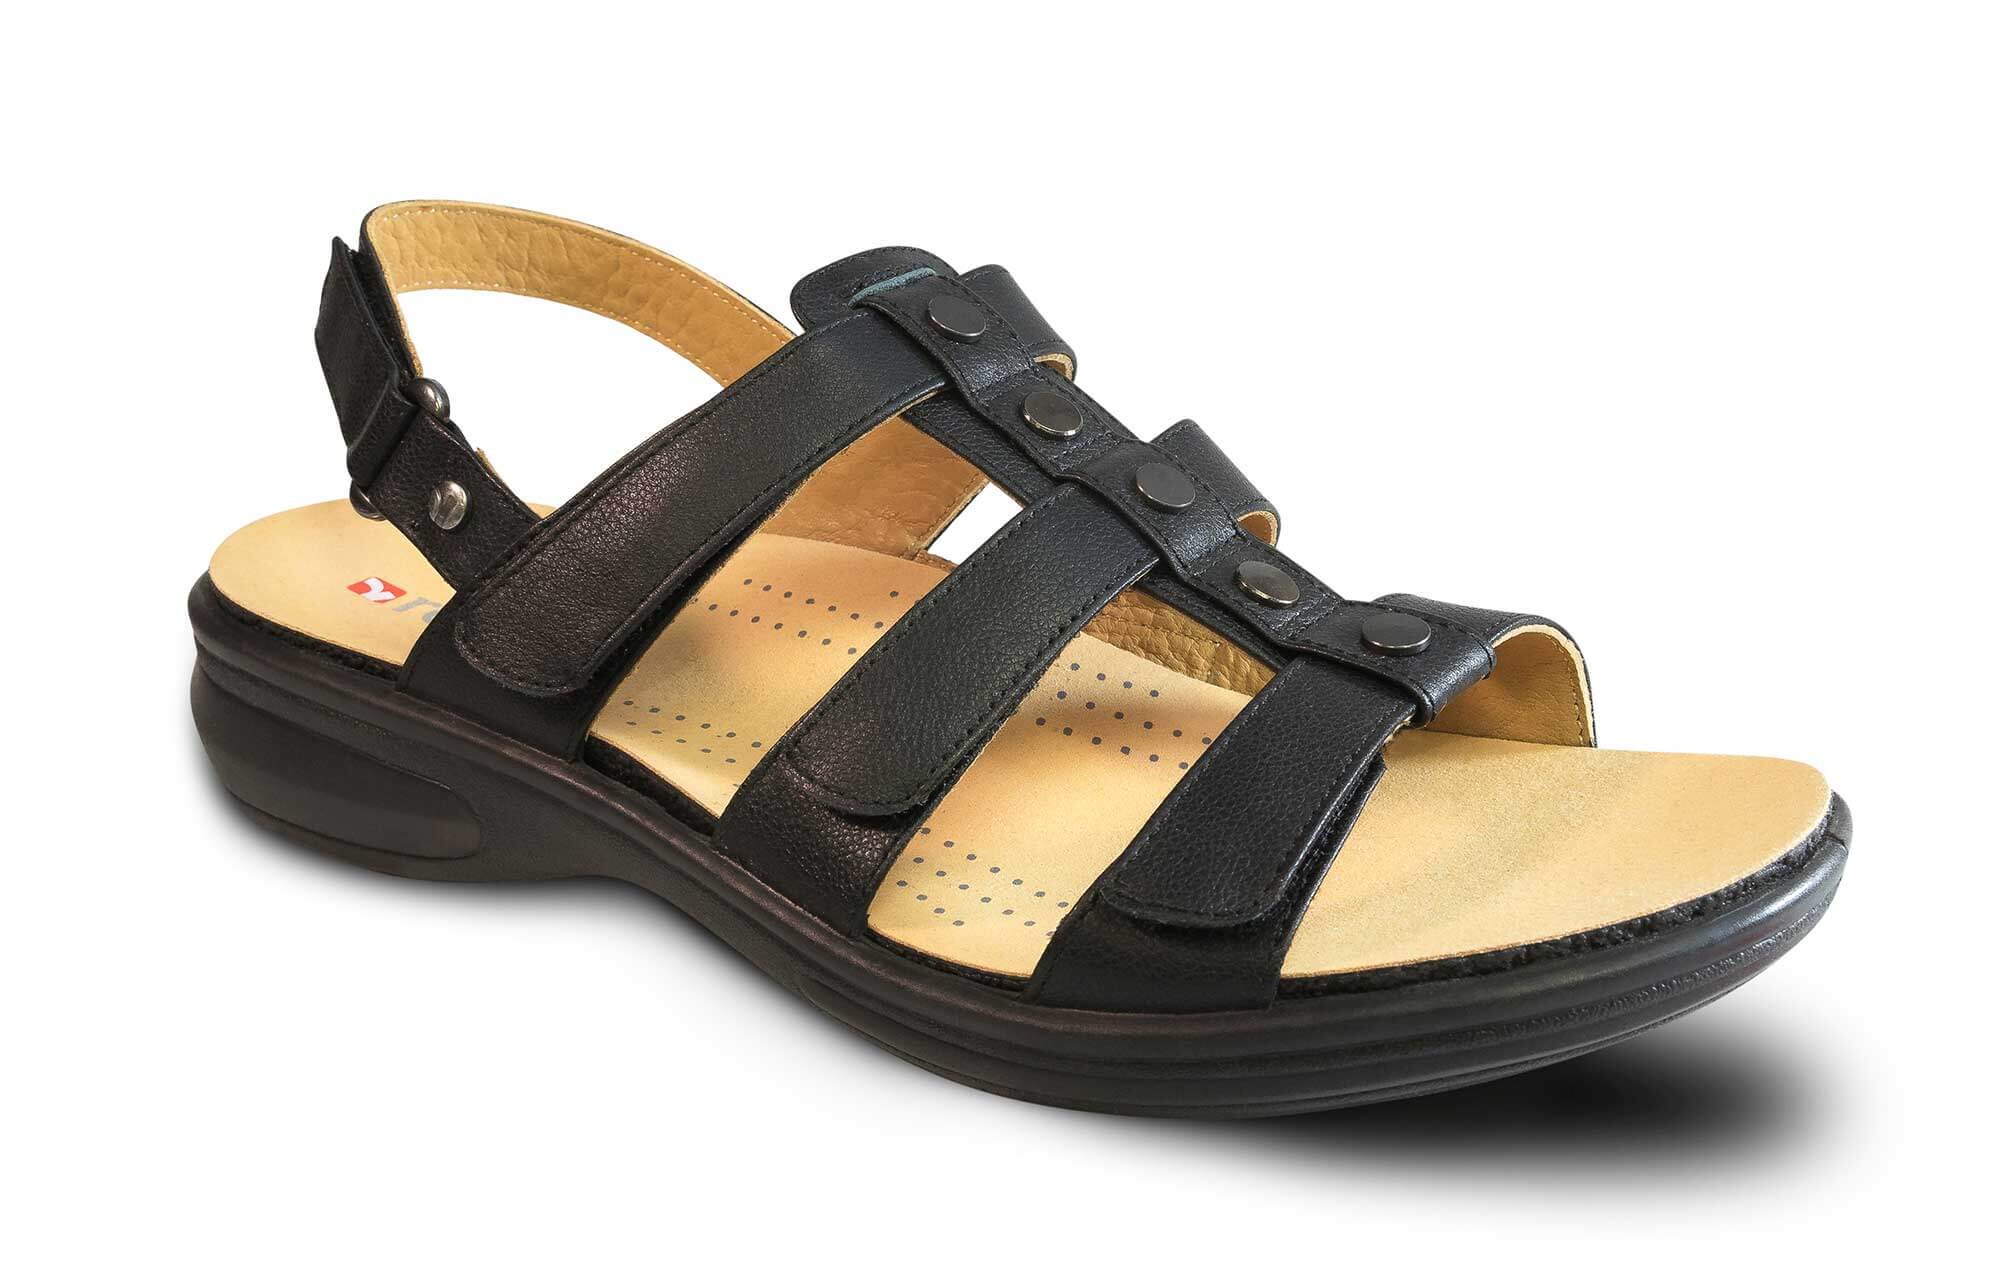 Revere Toledo - Women's Sandal - Medium - Wide - Extra Depth With Removable Foot Beds